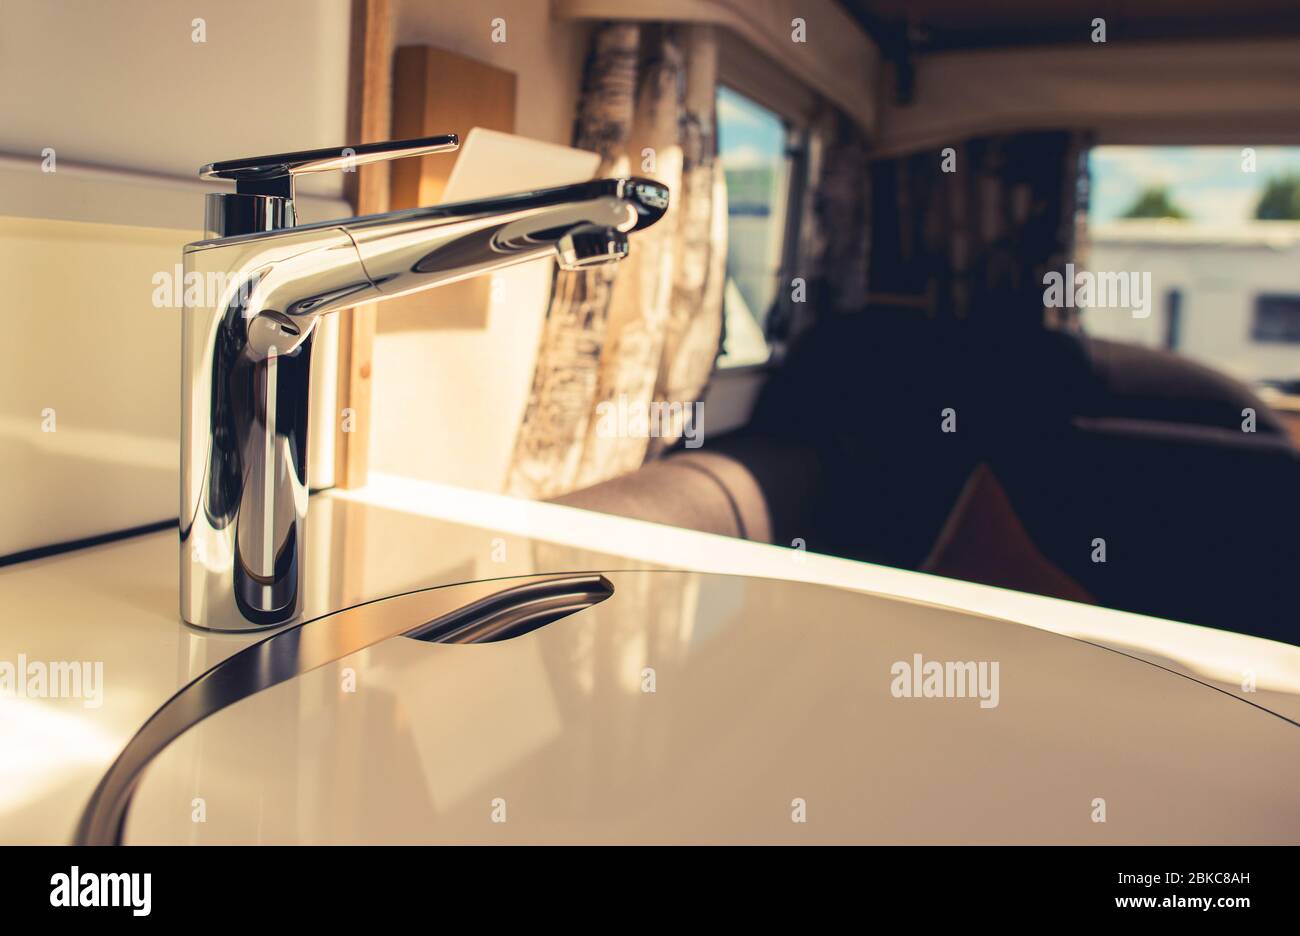 Modern RV Recreation Vehicle Travel Trailer Sink in a Kitchen Area. Cooking on the Road Theme. Stock Photo